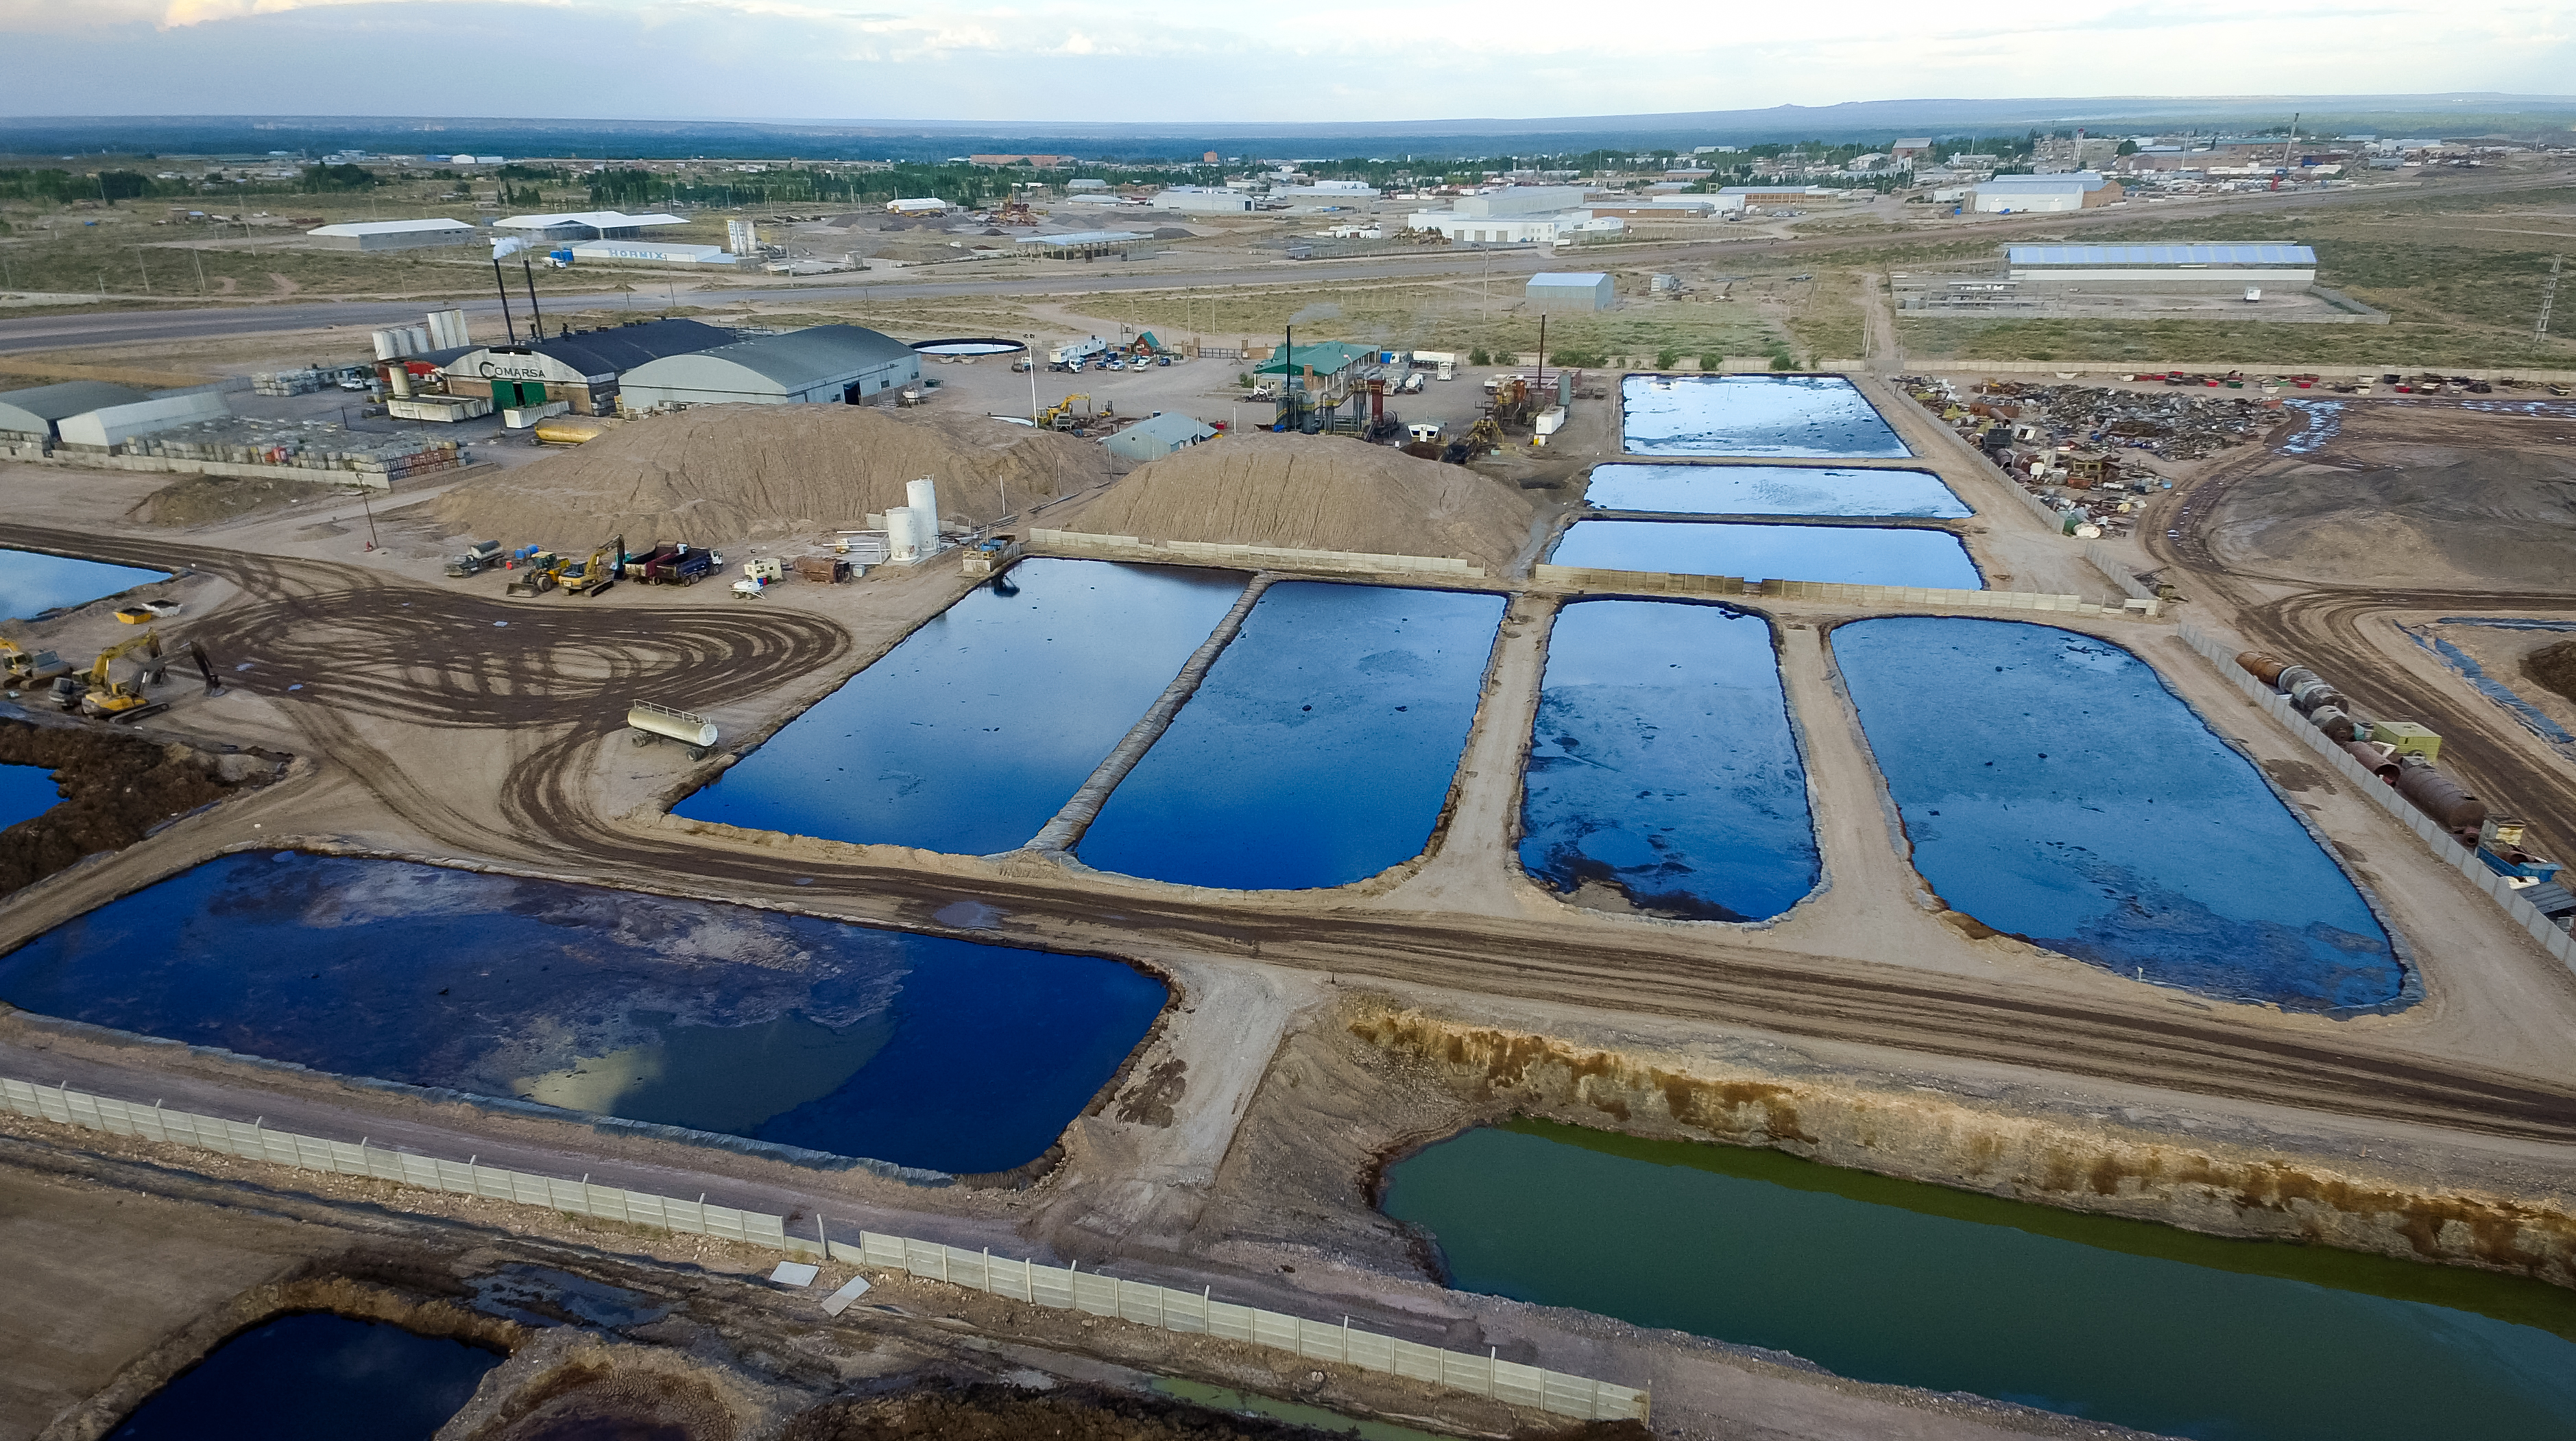 Aerial view of Comarsa's oil and gas waste storage and treatment facility in Argentina